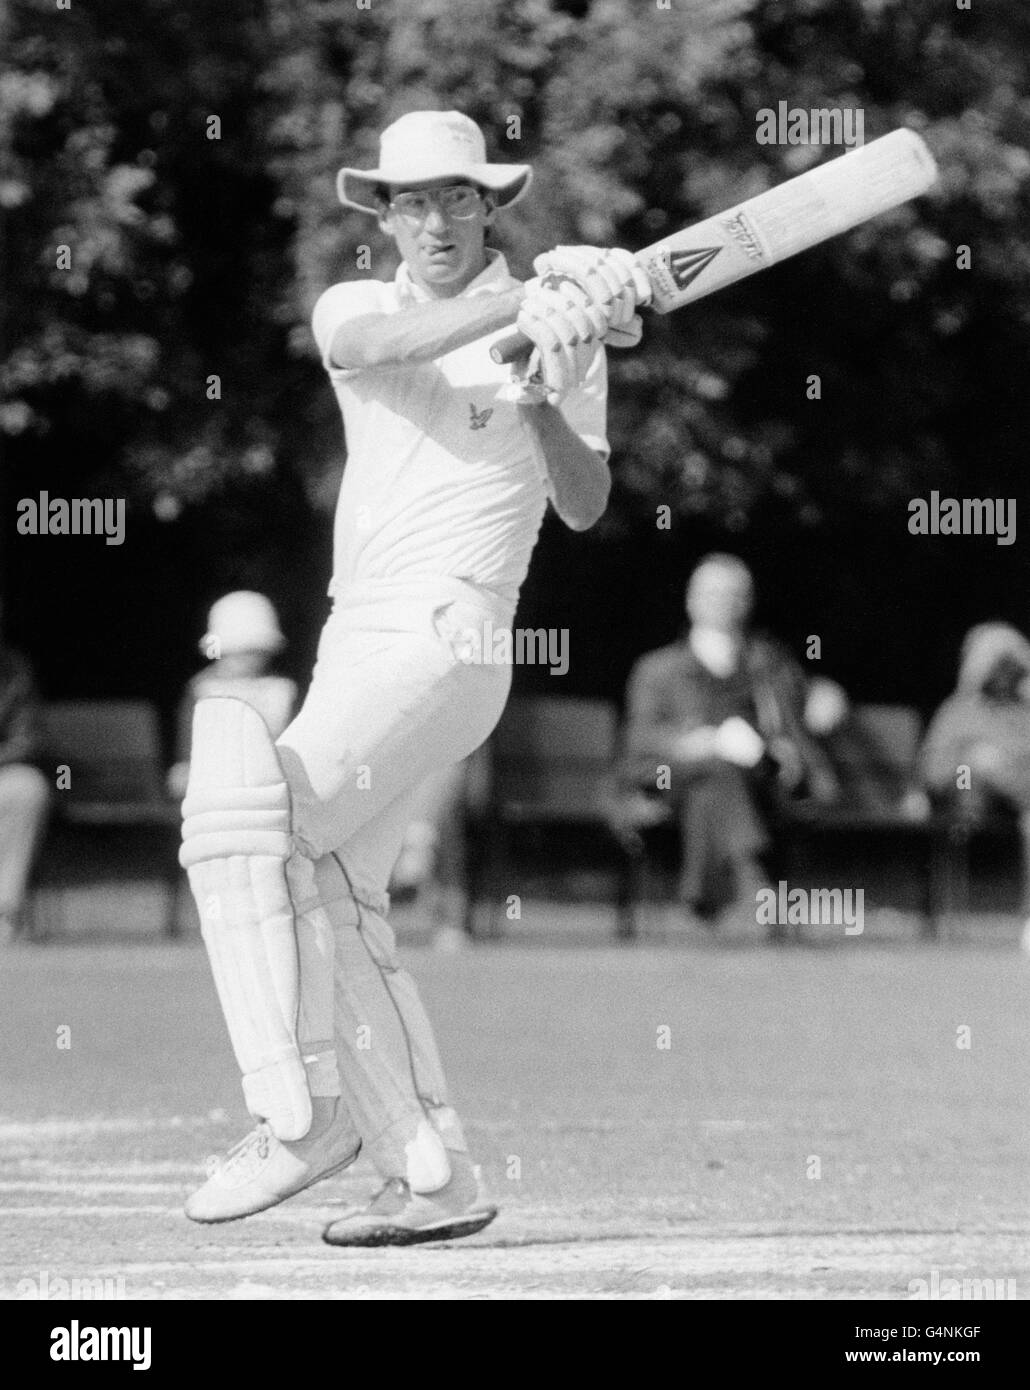 Somerset cricketer Peter Roebuck in to bat during the Benefit Match for Ian Botham at the Finchley Cricket Club in North London. Stock Photo